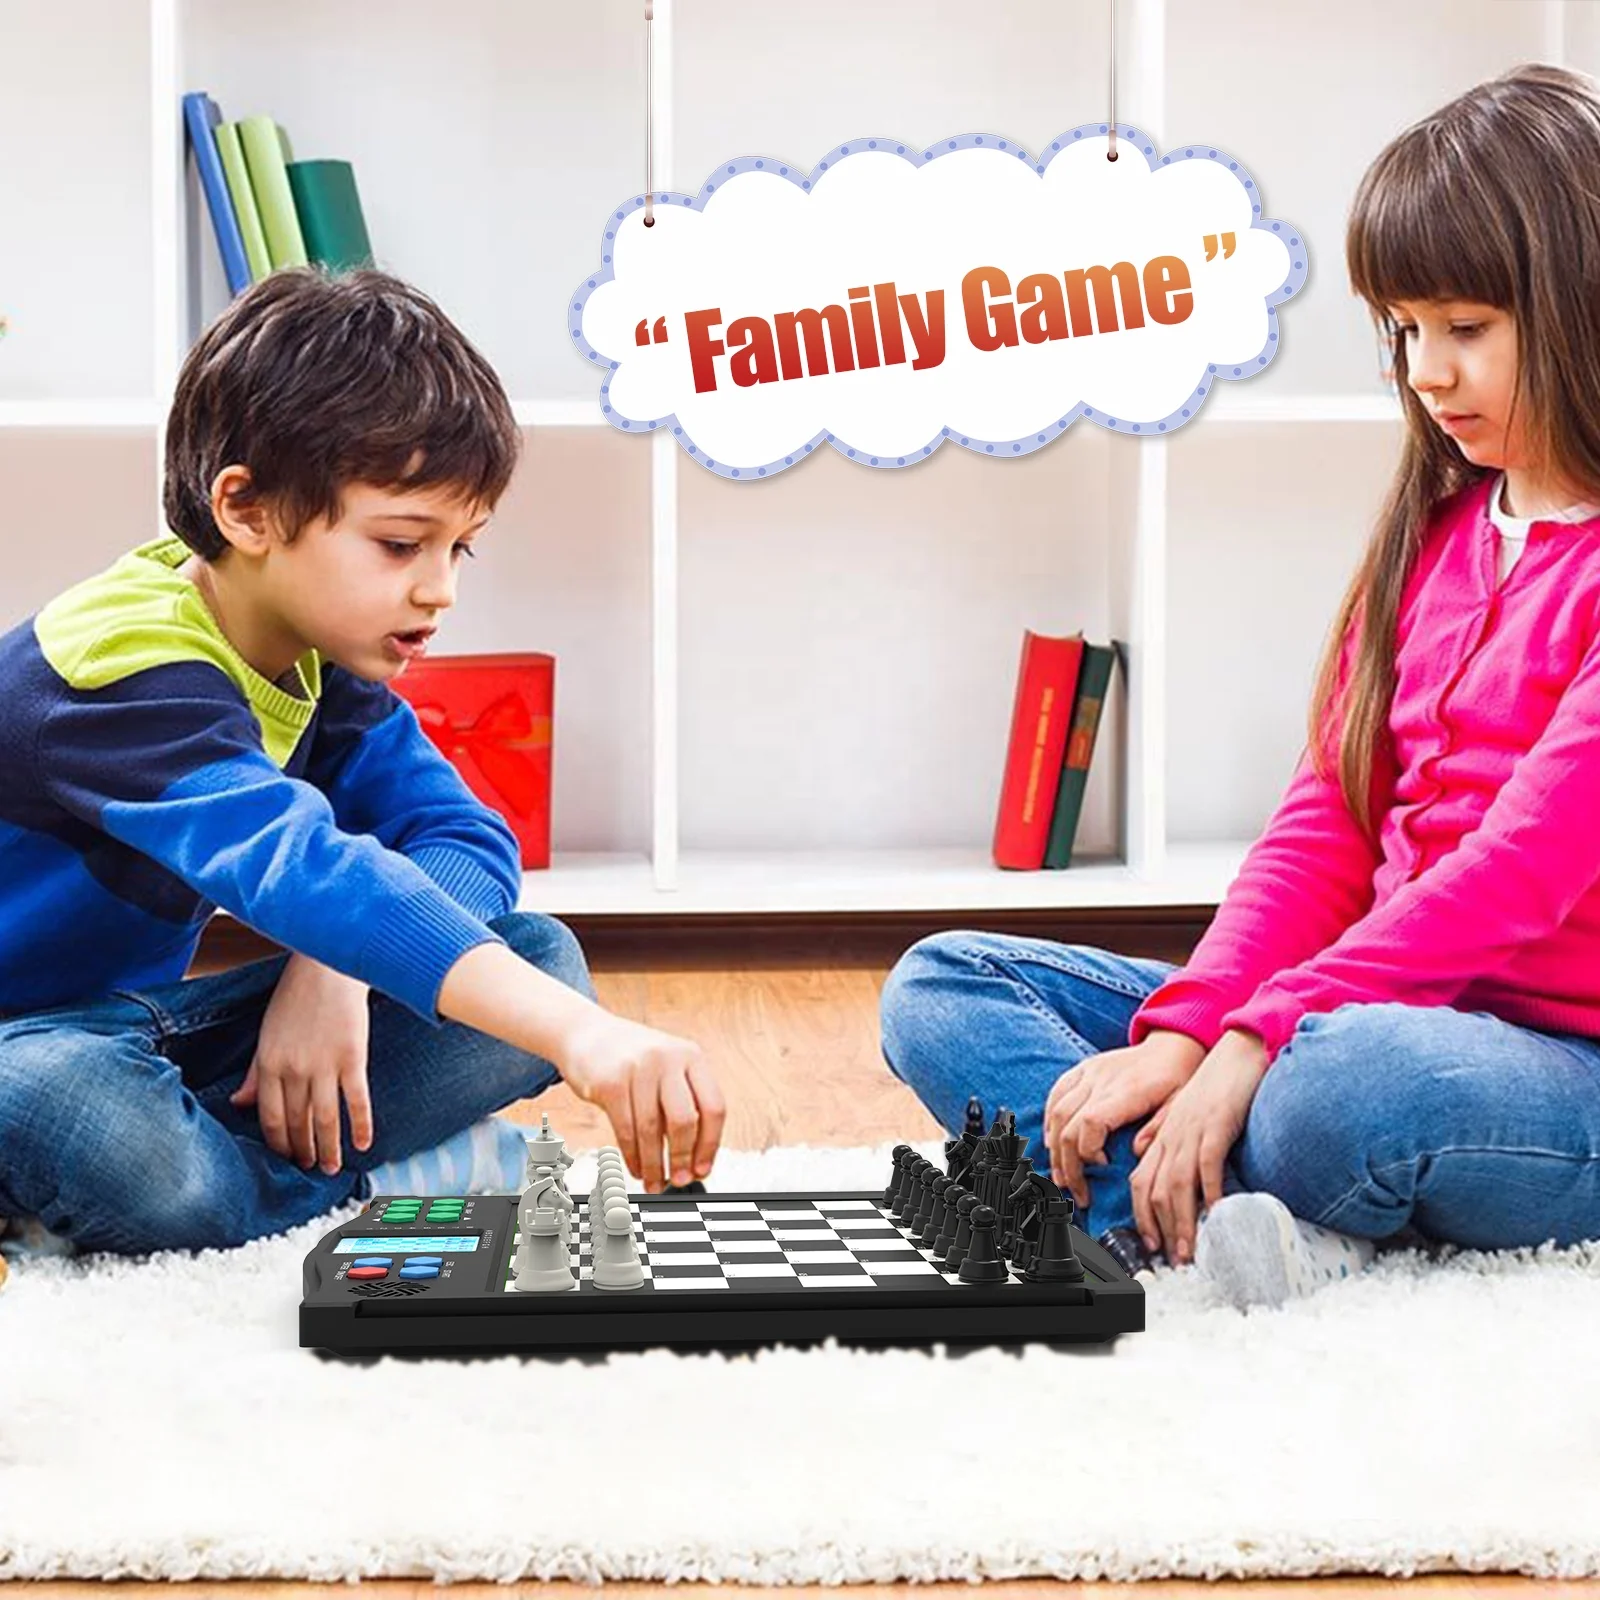 Beginners chess computer electronic Chess Board Game With Learning Chess  Board and Cards, For Kids to Learn an Play - AliExpress